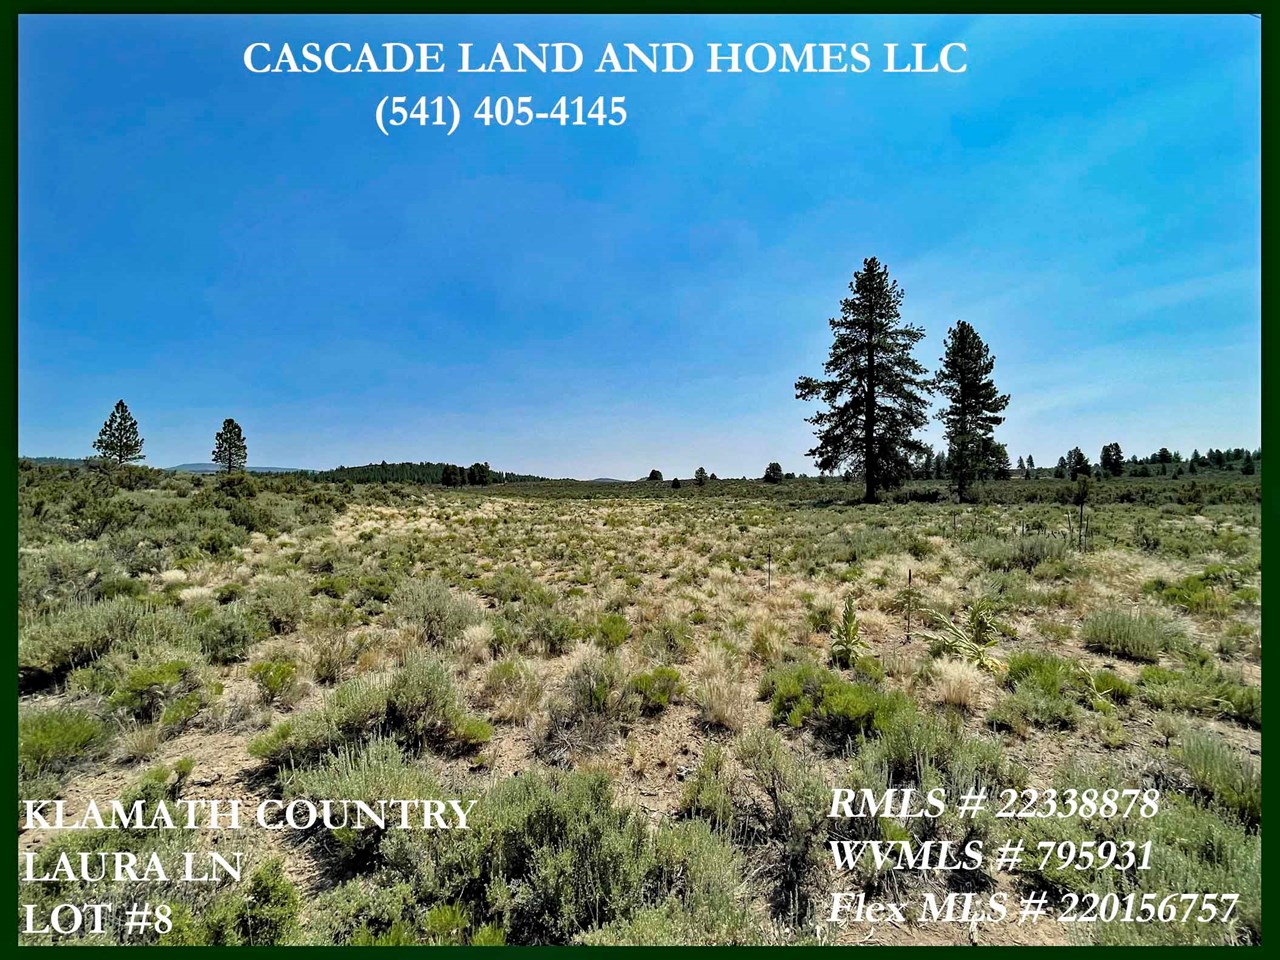 this large, 1.08 acre property is located in the klamath country subdivision between chiloquin and sprague river, oregon. with the wide-open space here, and gorgeous views of the valley and pasture land, you really get the feeling like you are out in the old west of years ago.